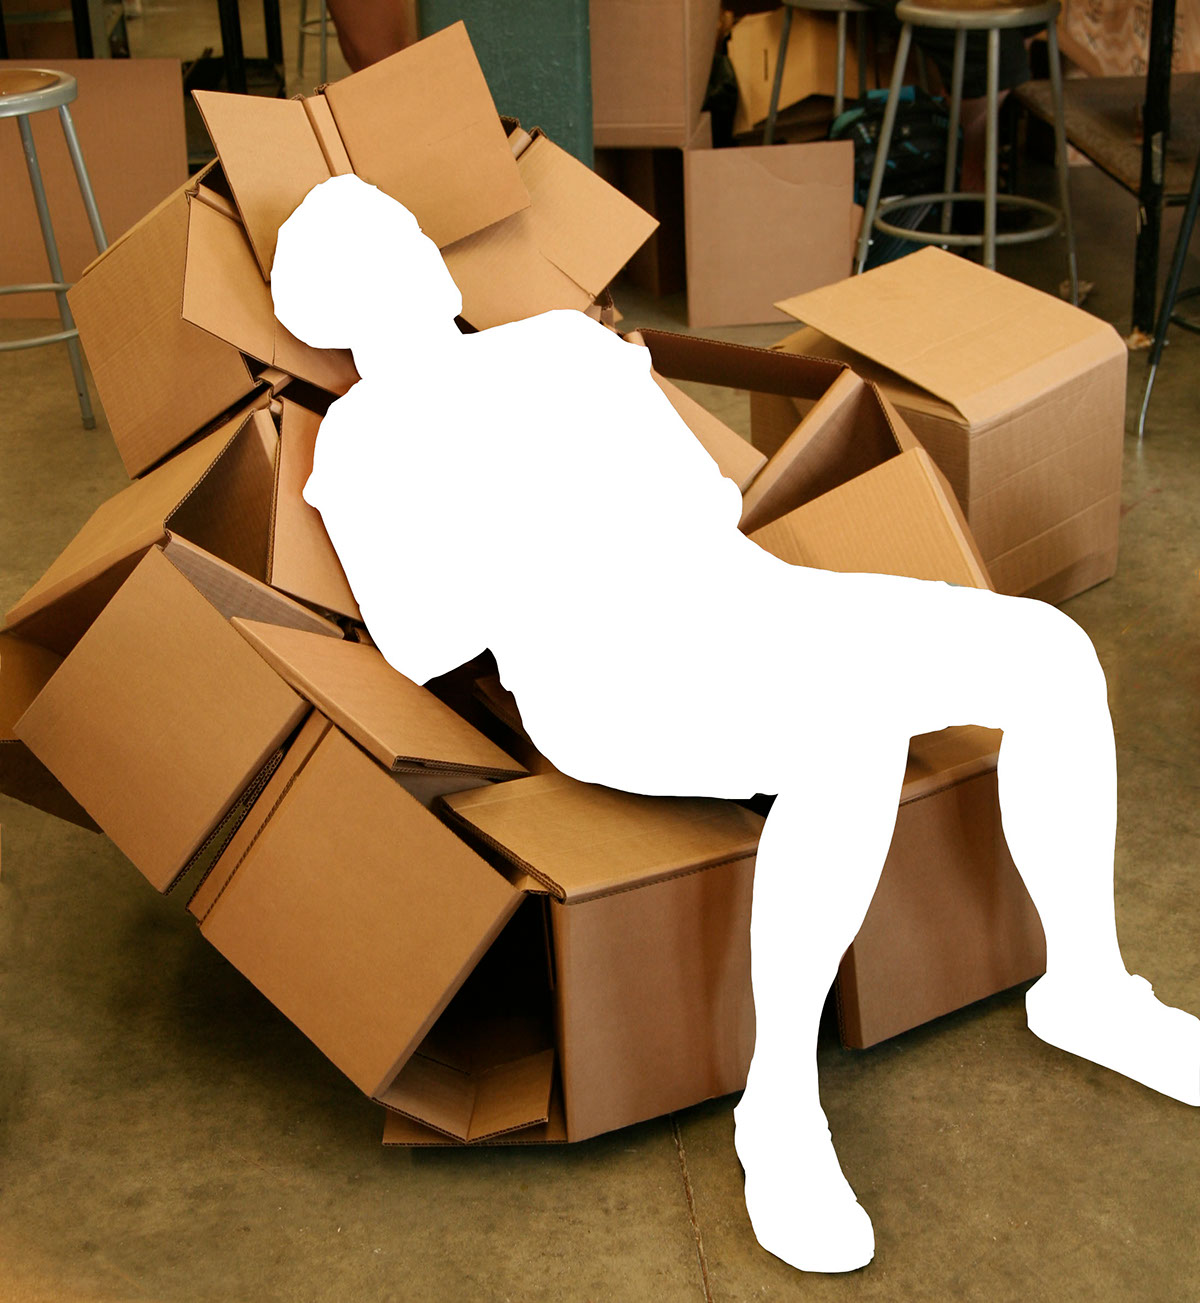 cardboard chair Geodesic dome Equilateral triangle furniture